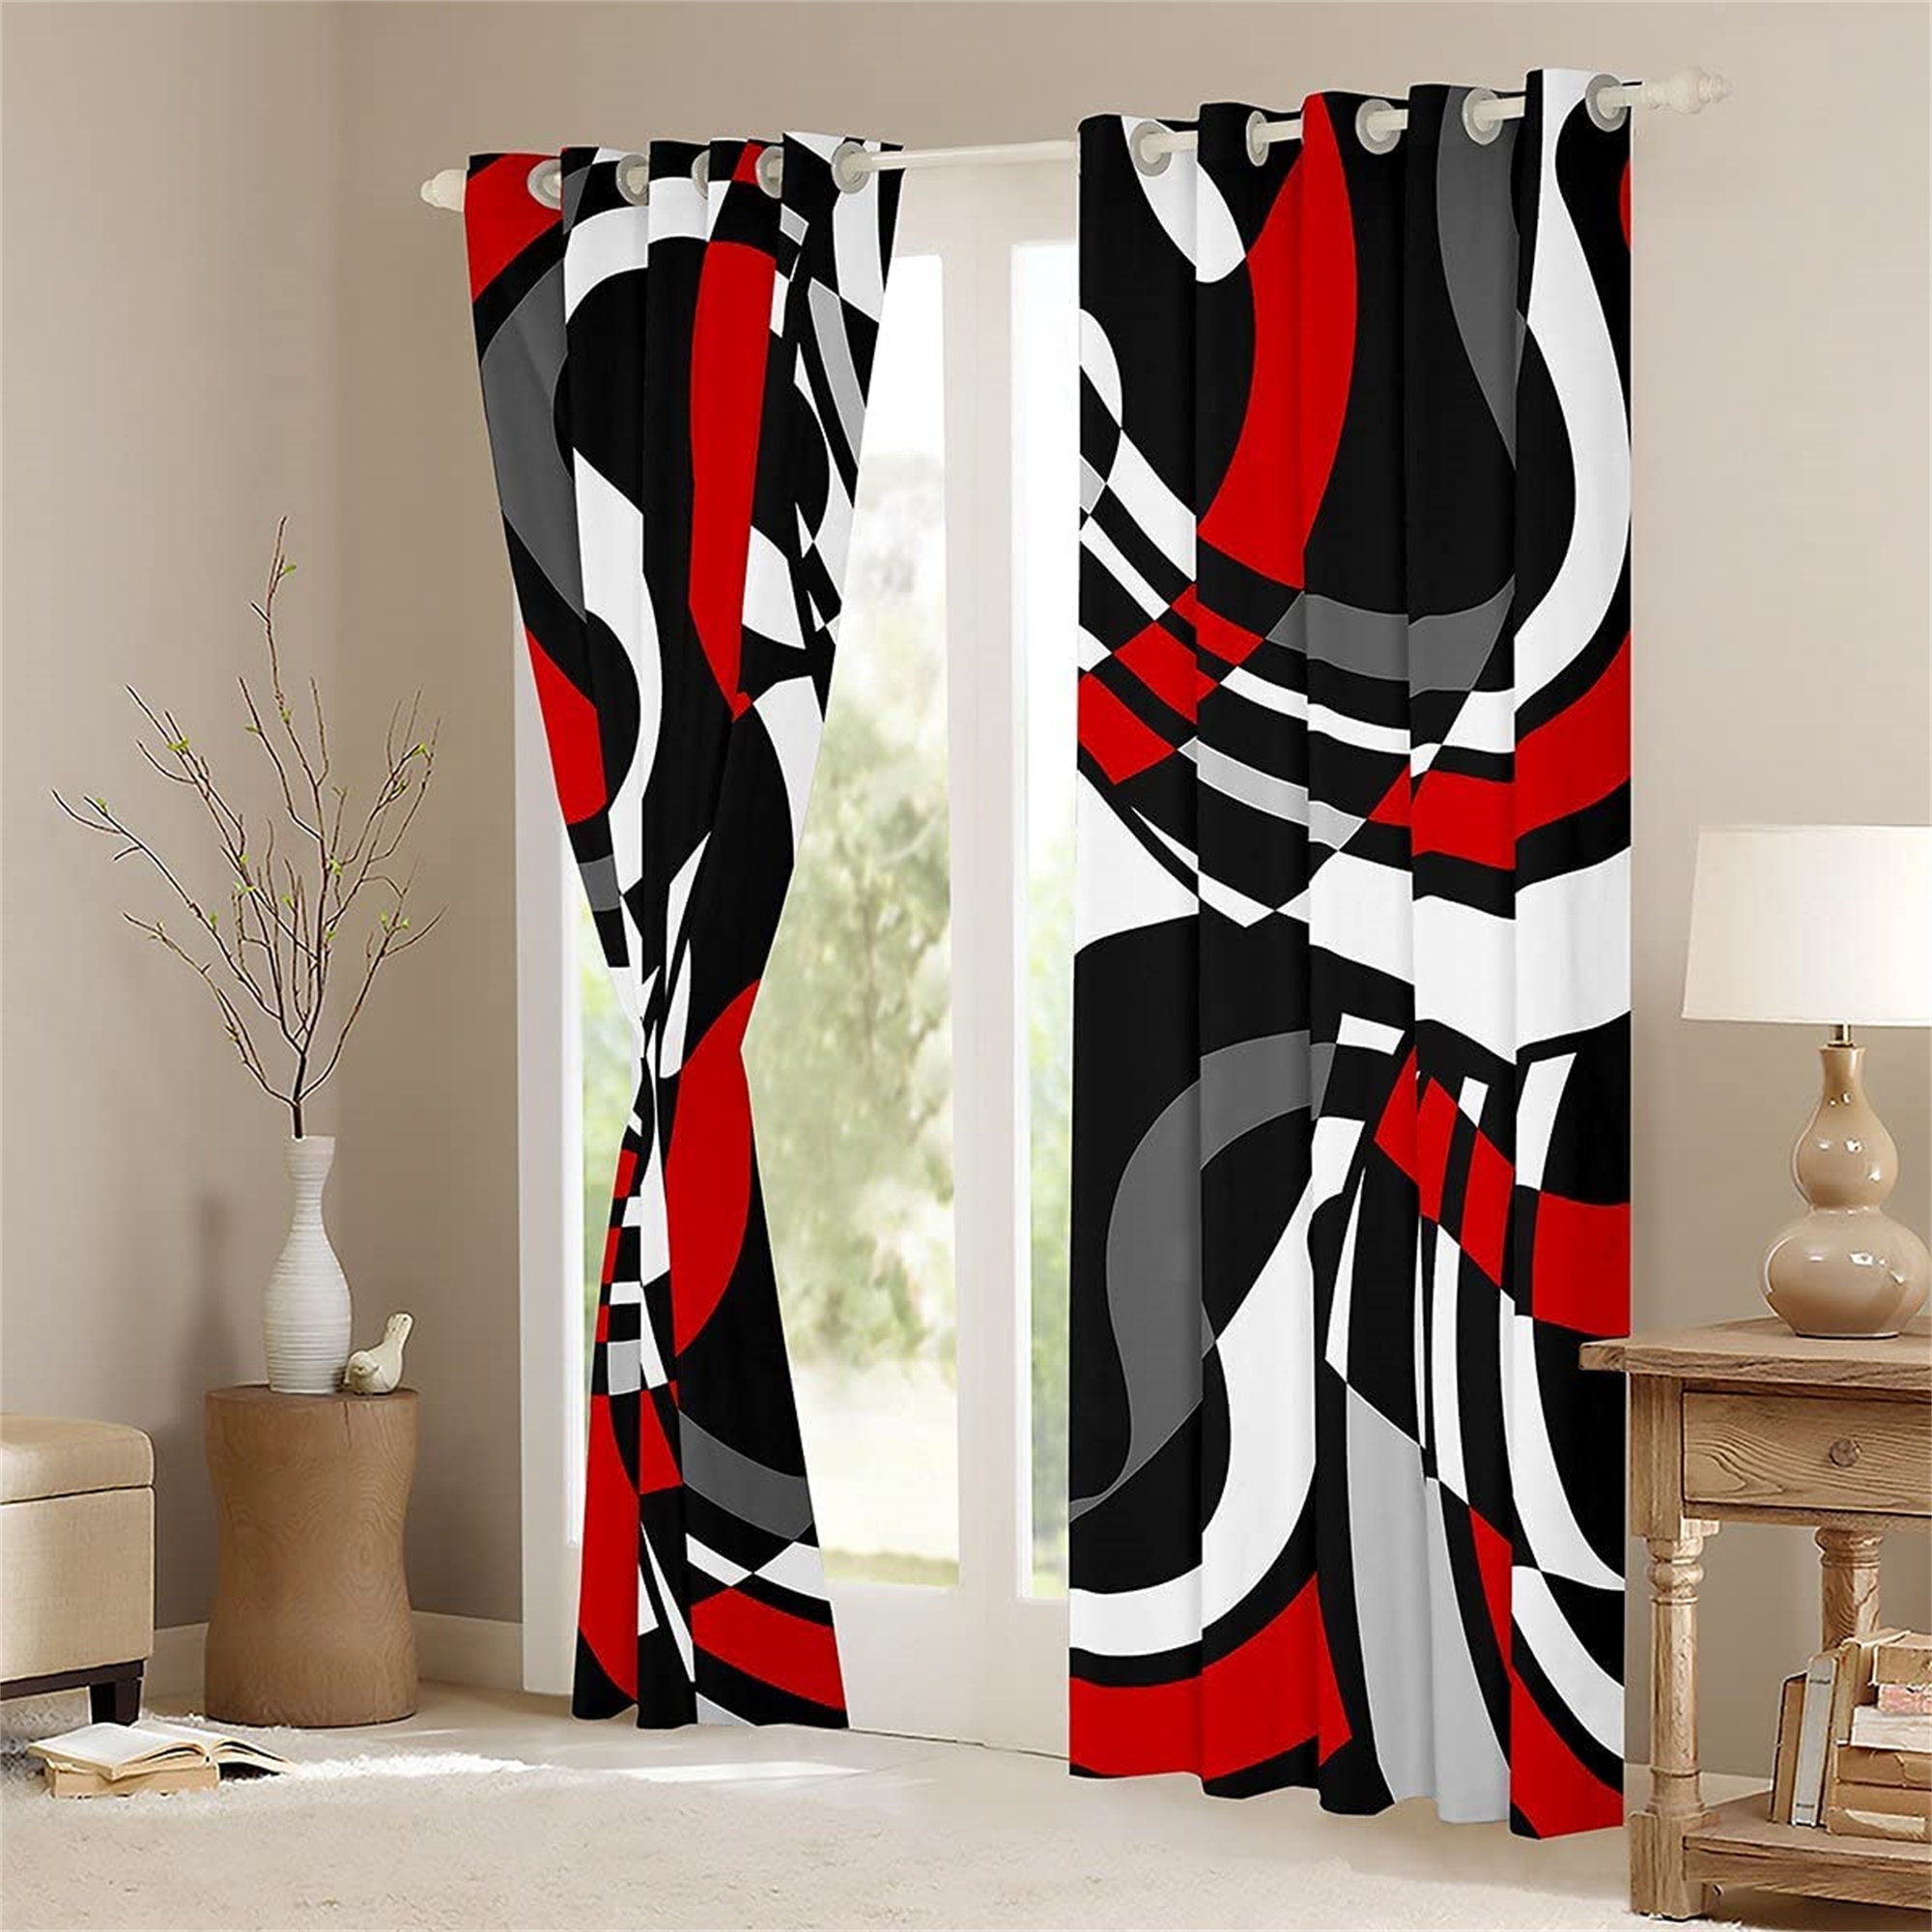  MESHELLY Red Black Grey Geometric Kitchen Curtains